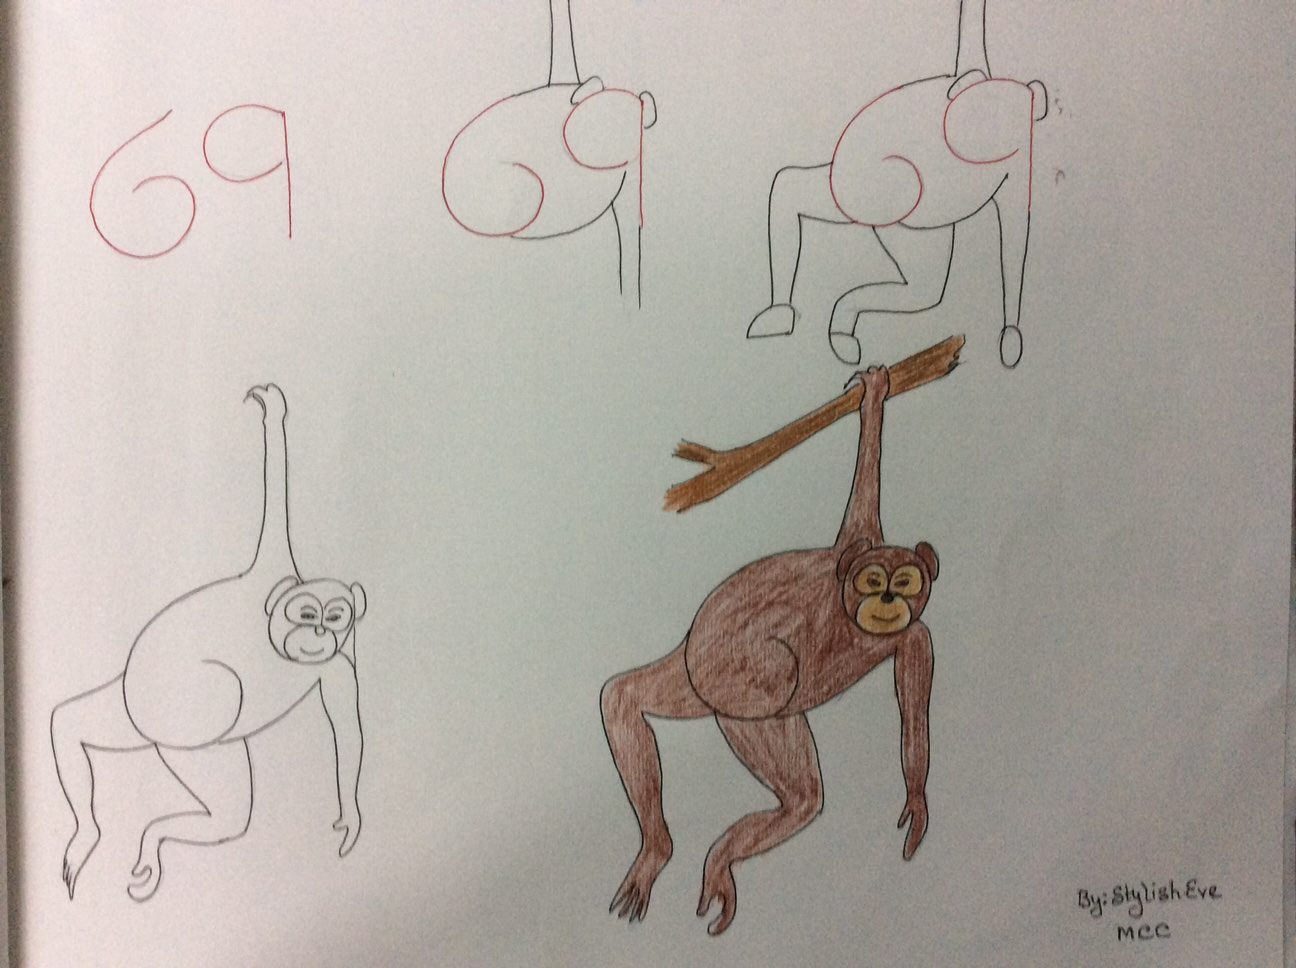 69 Fun Kids Drawings With Number As a Base